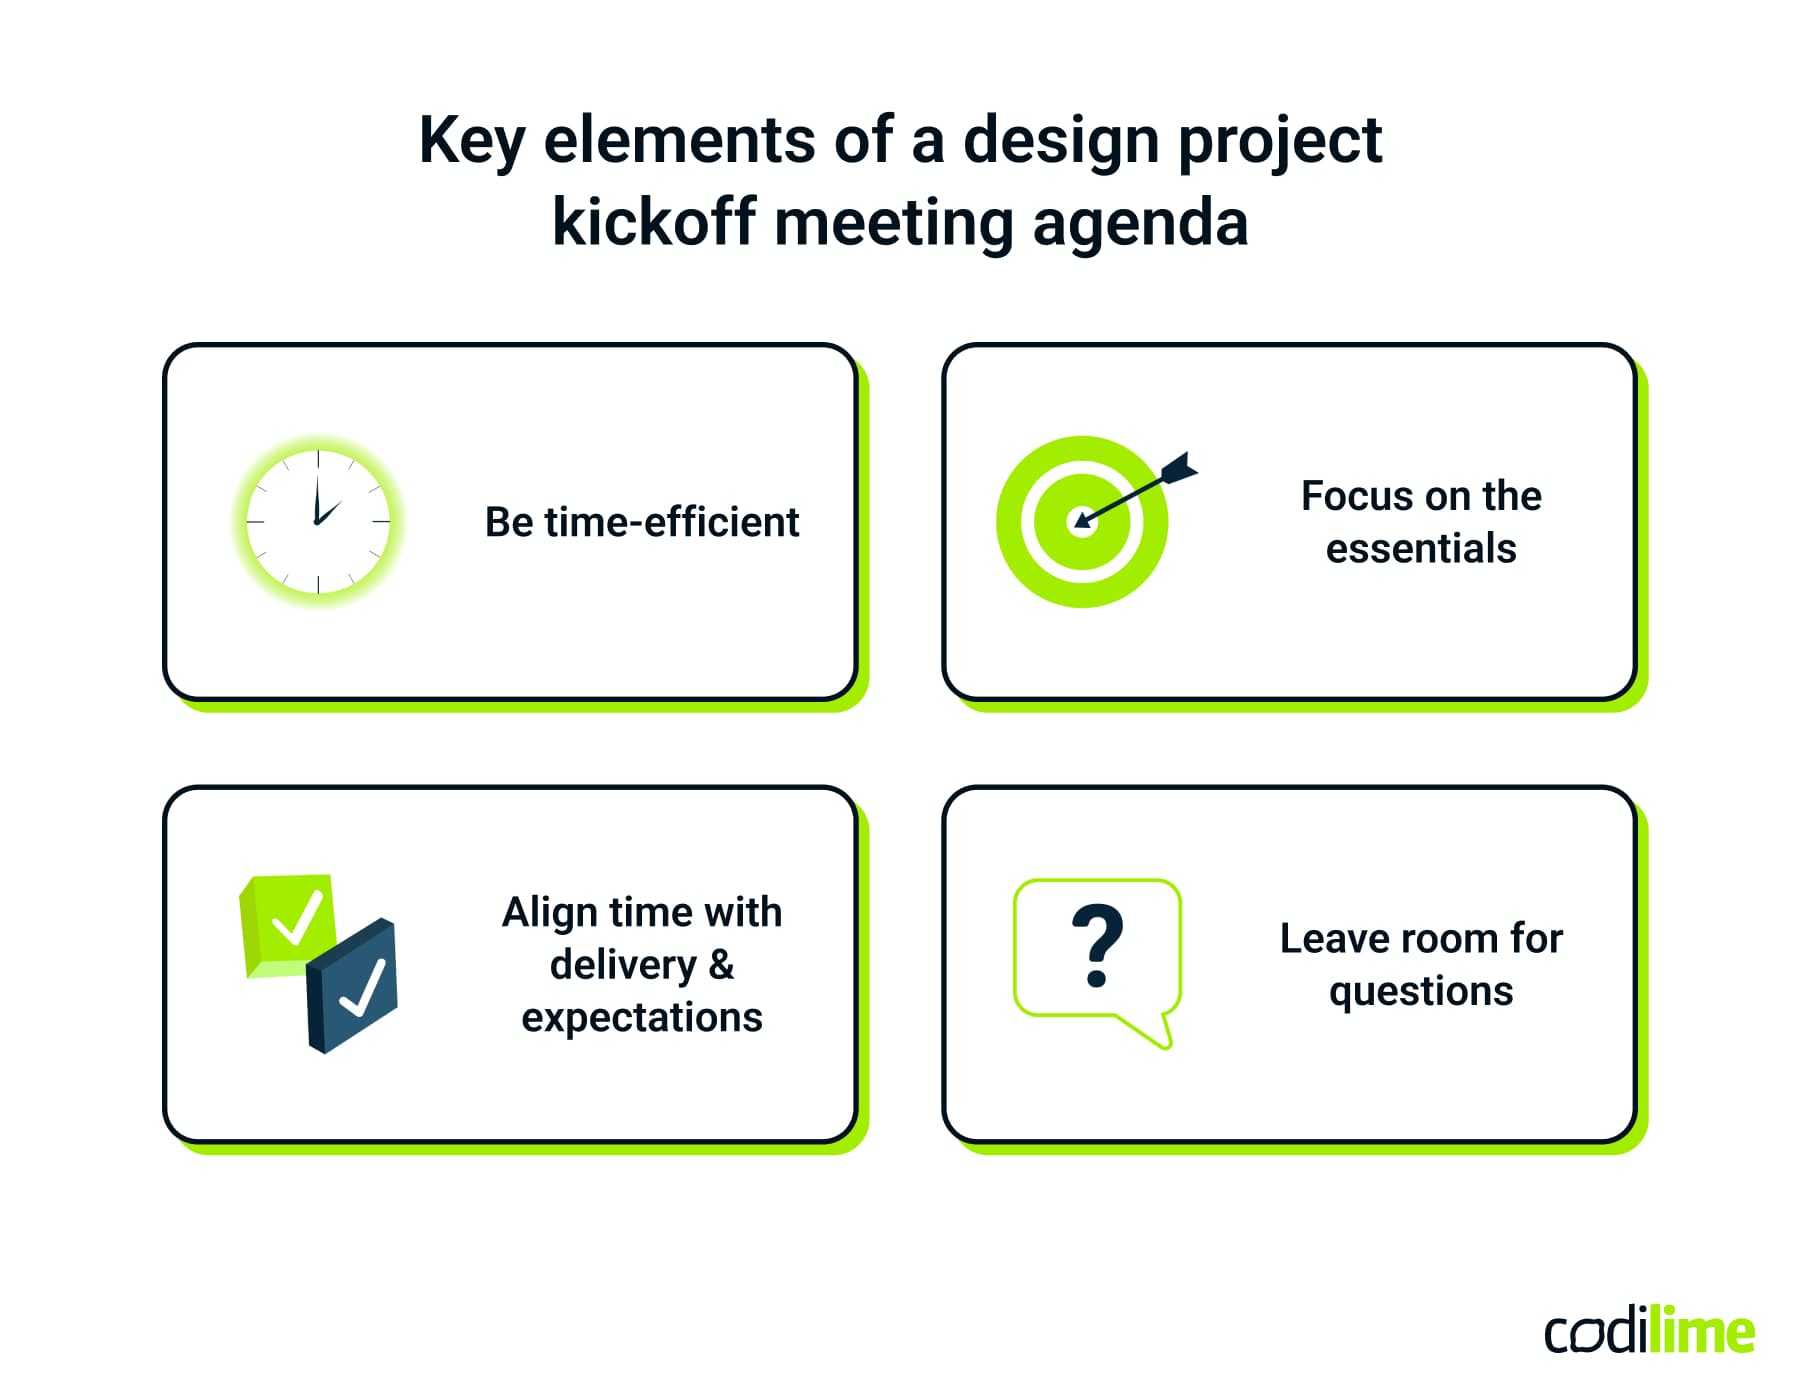 Key elements during a design project kickoff meeting